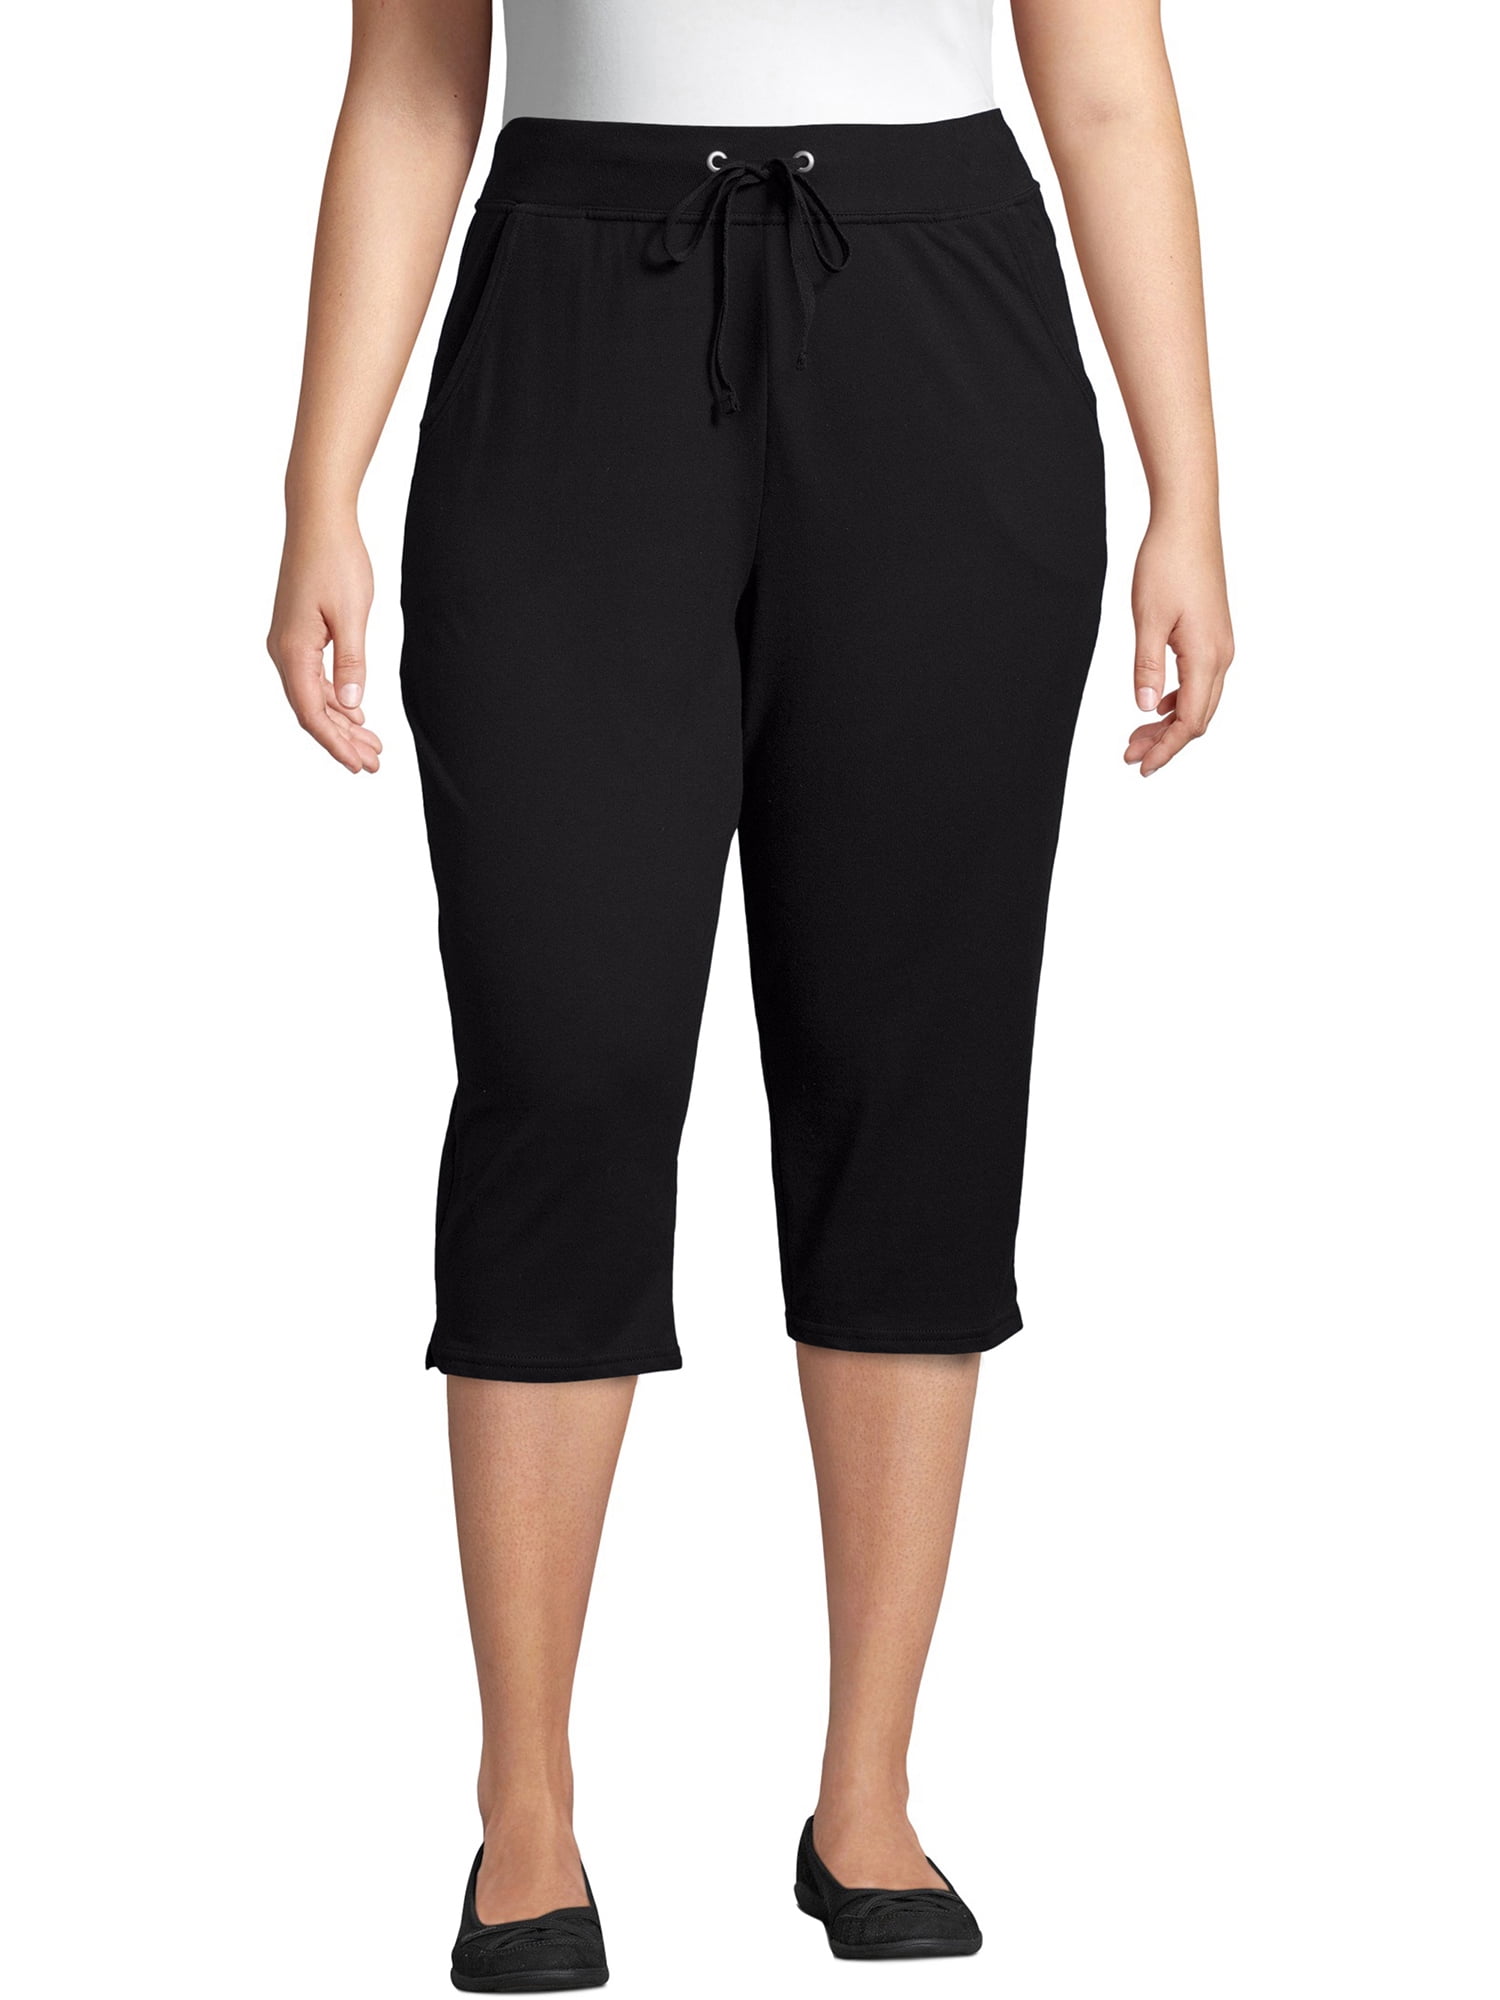 Just My Size Women's French Terry Capri 